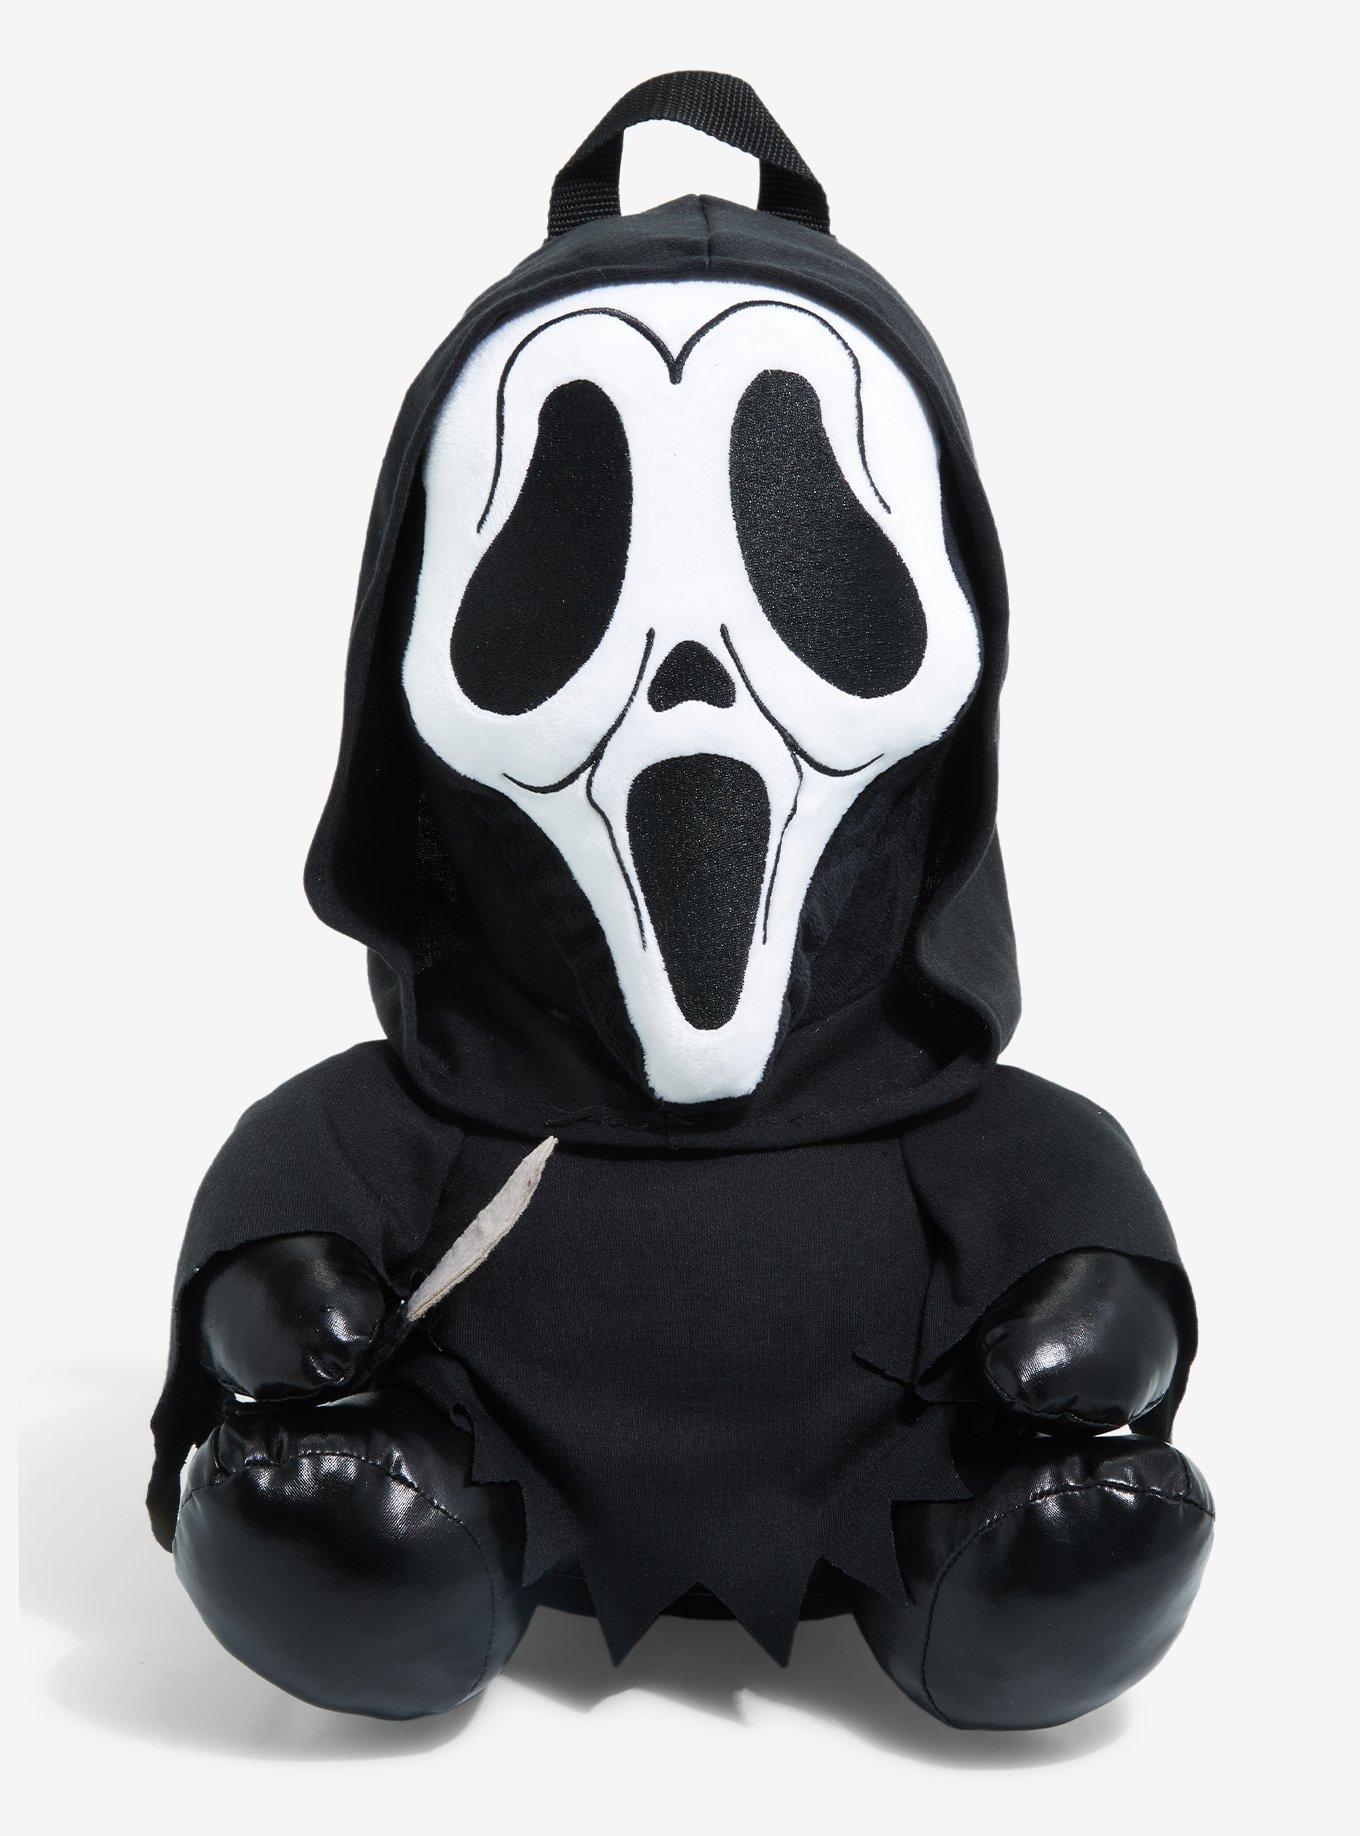 Ghostface Scream Stock Photos and Pictures - 59 Images